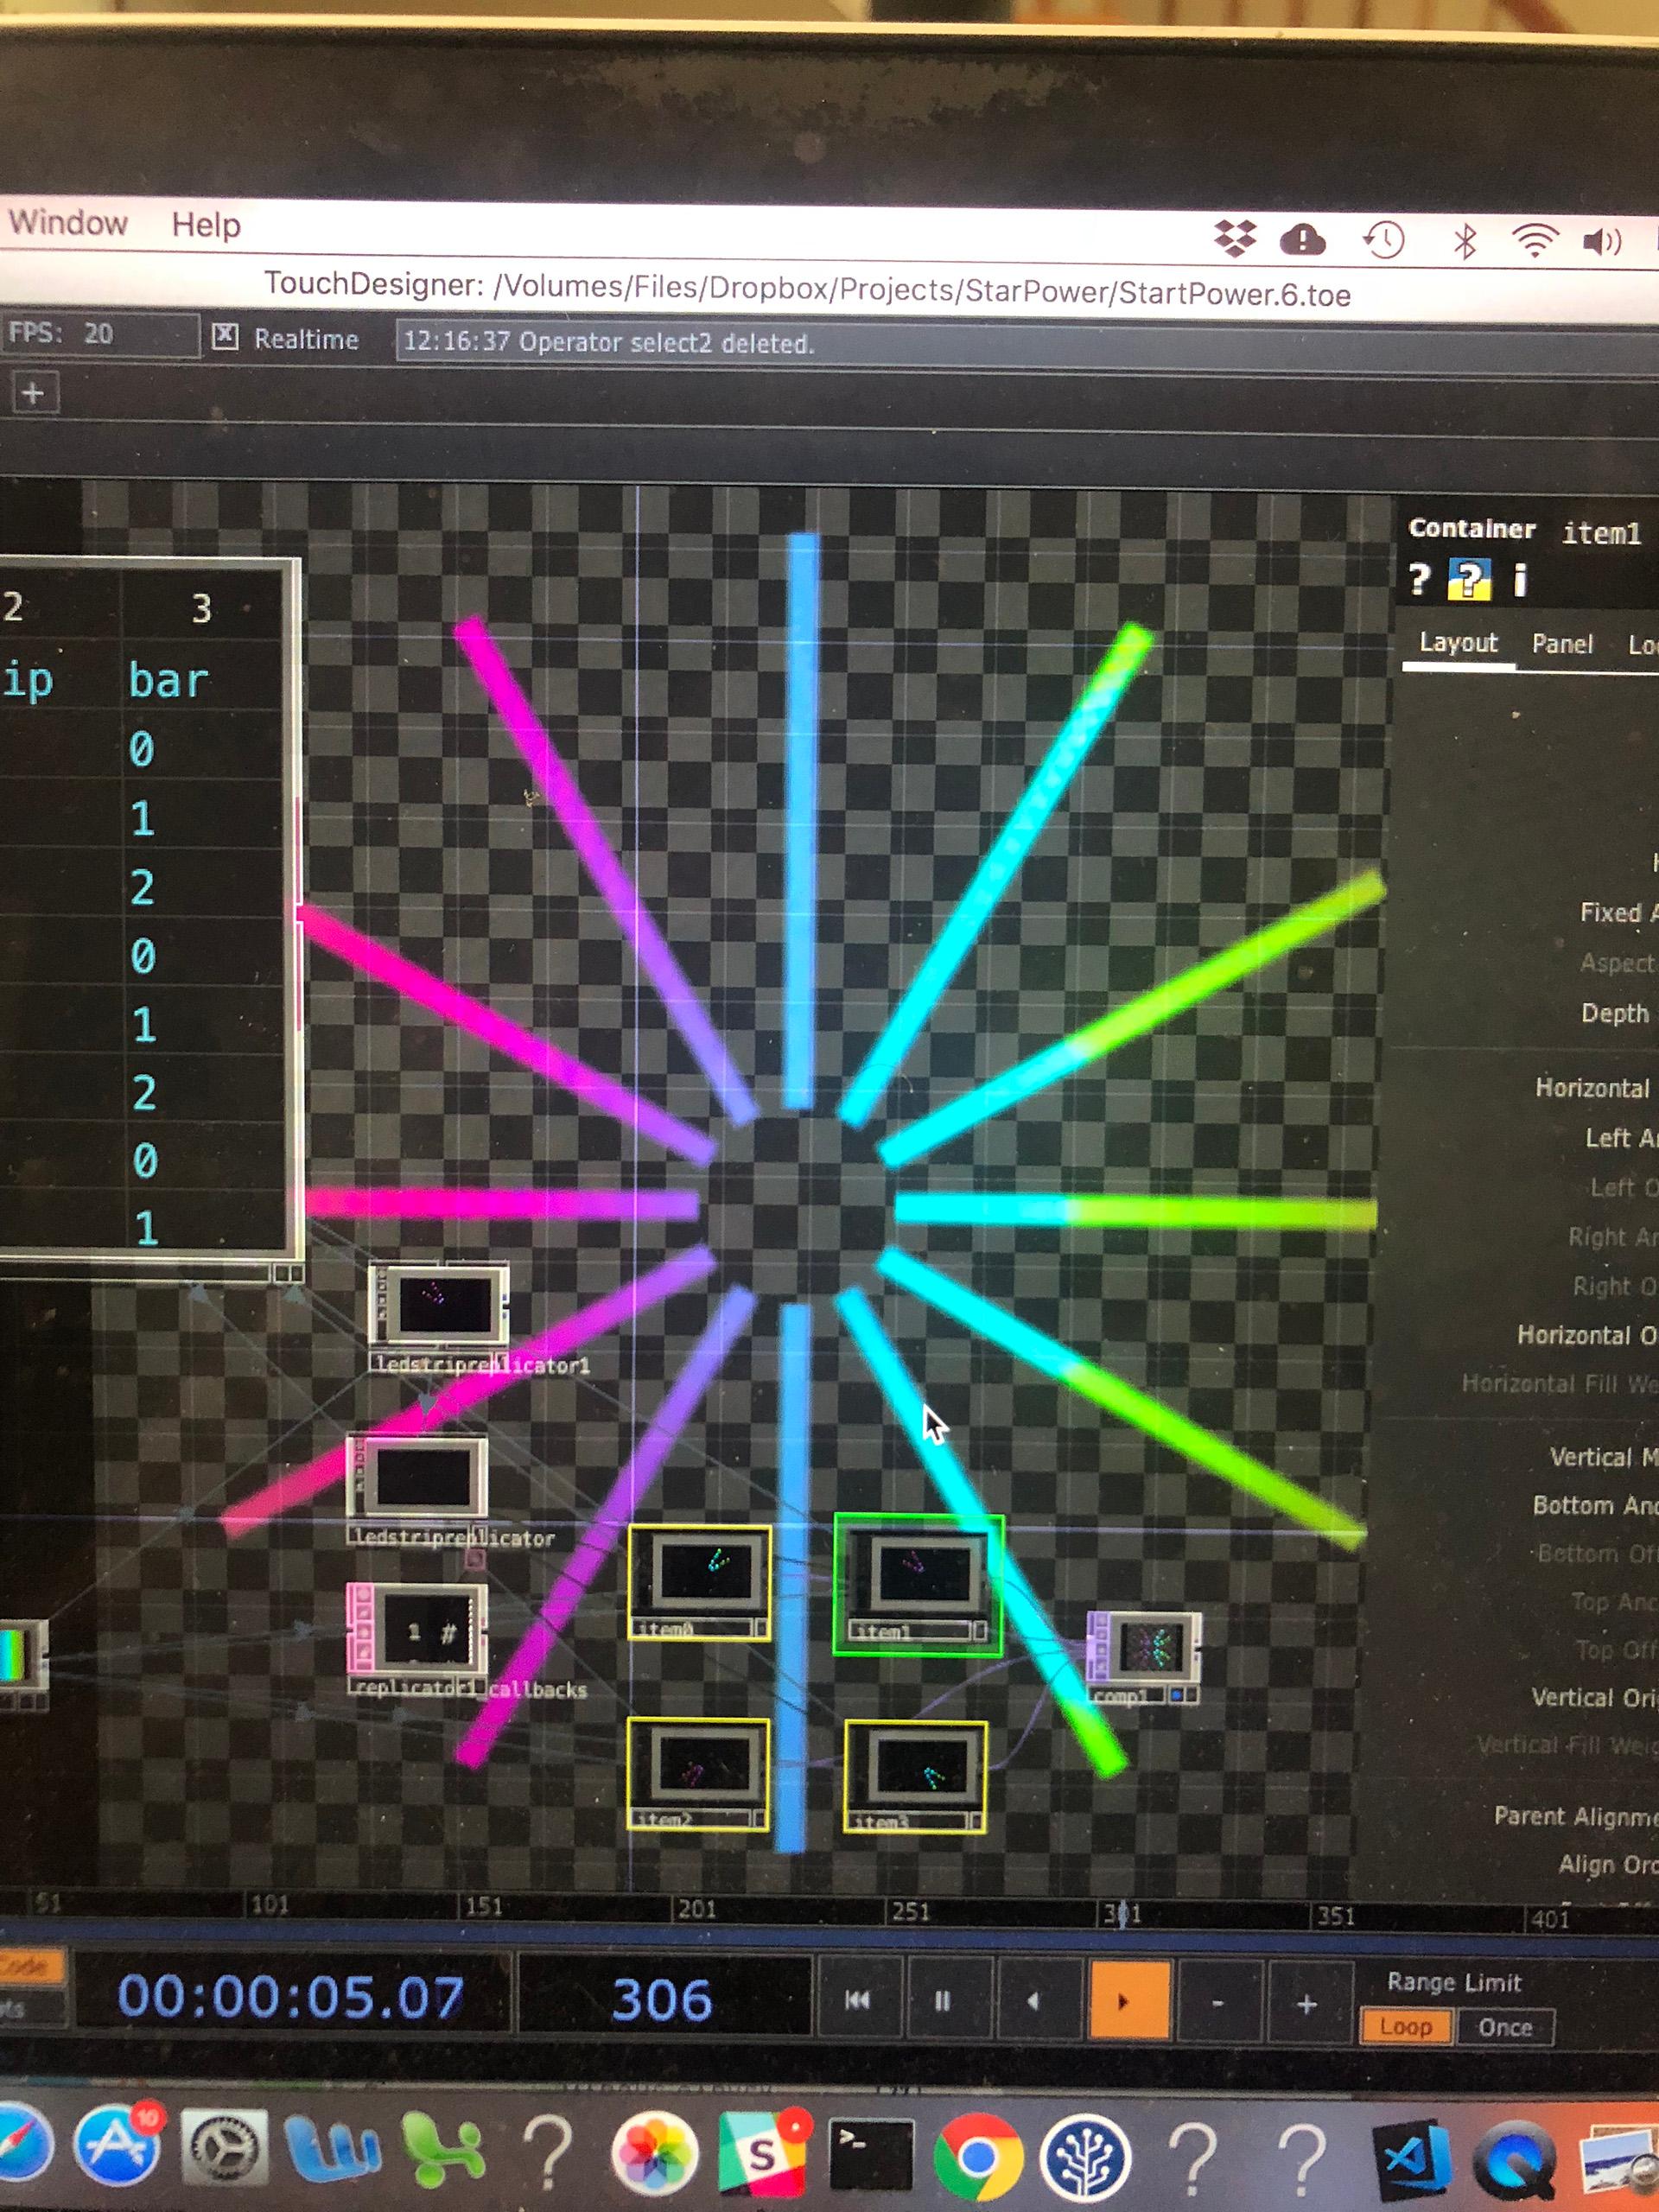 LED Mapping in TouchDesigner